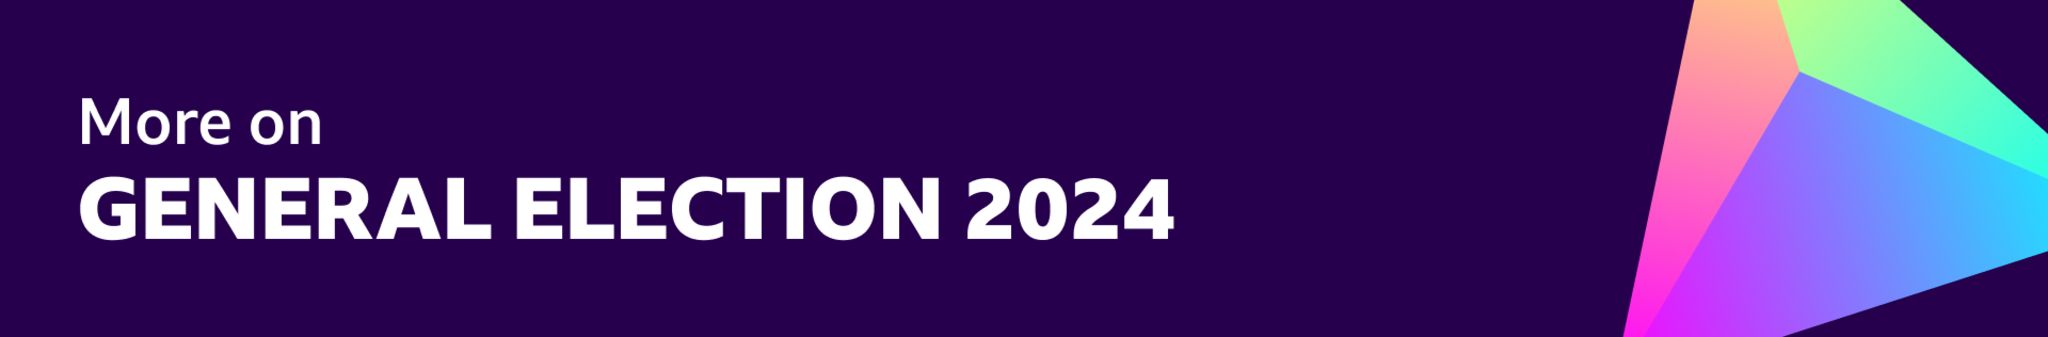 Banner that says 'More on General Election 2024'